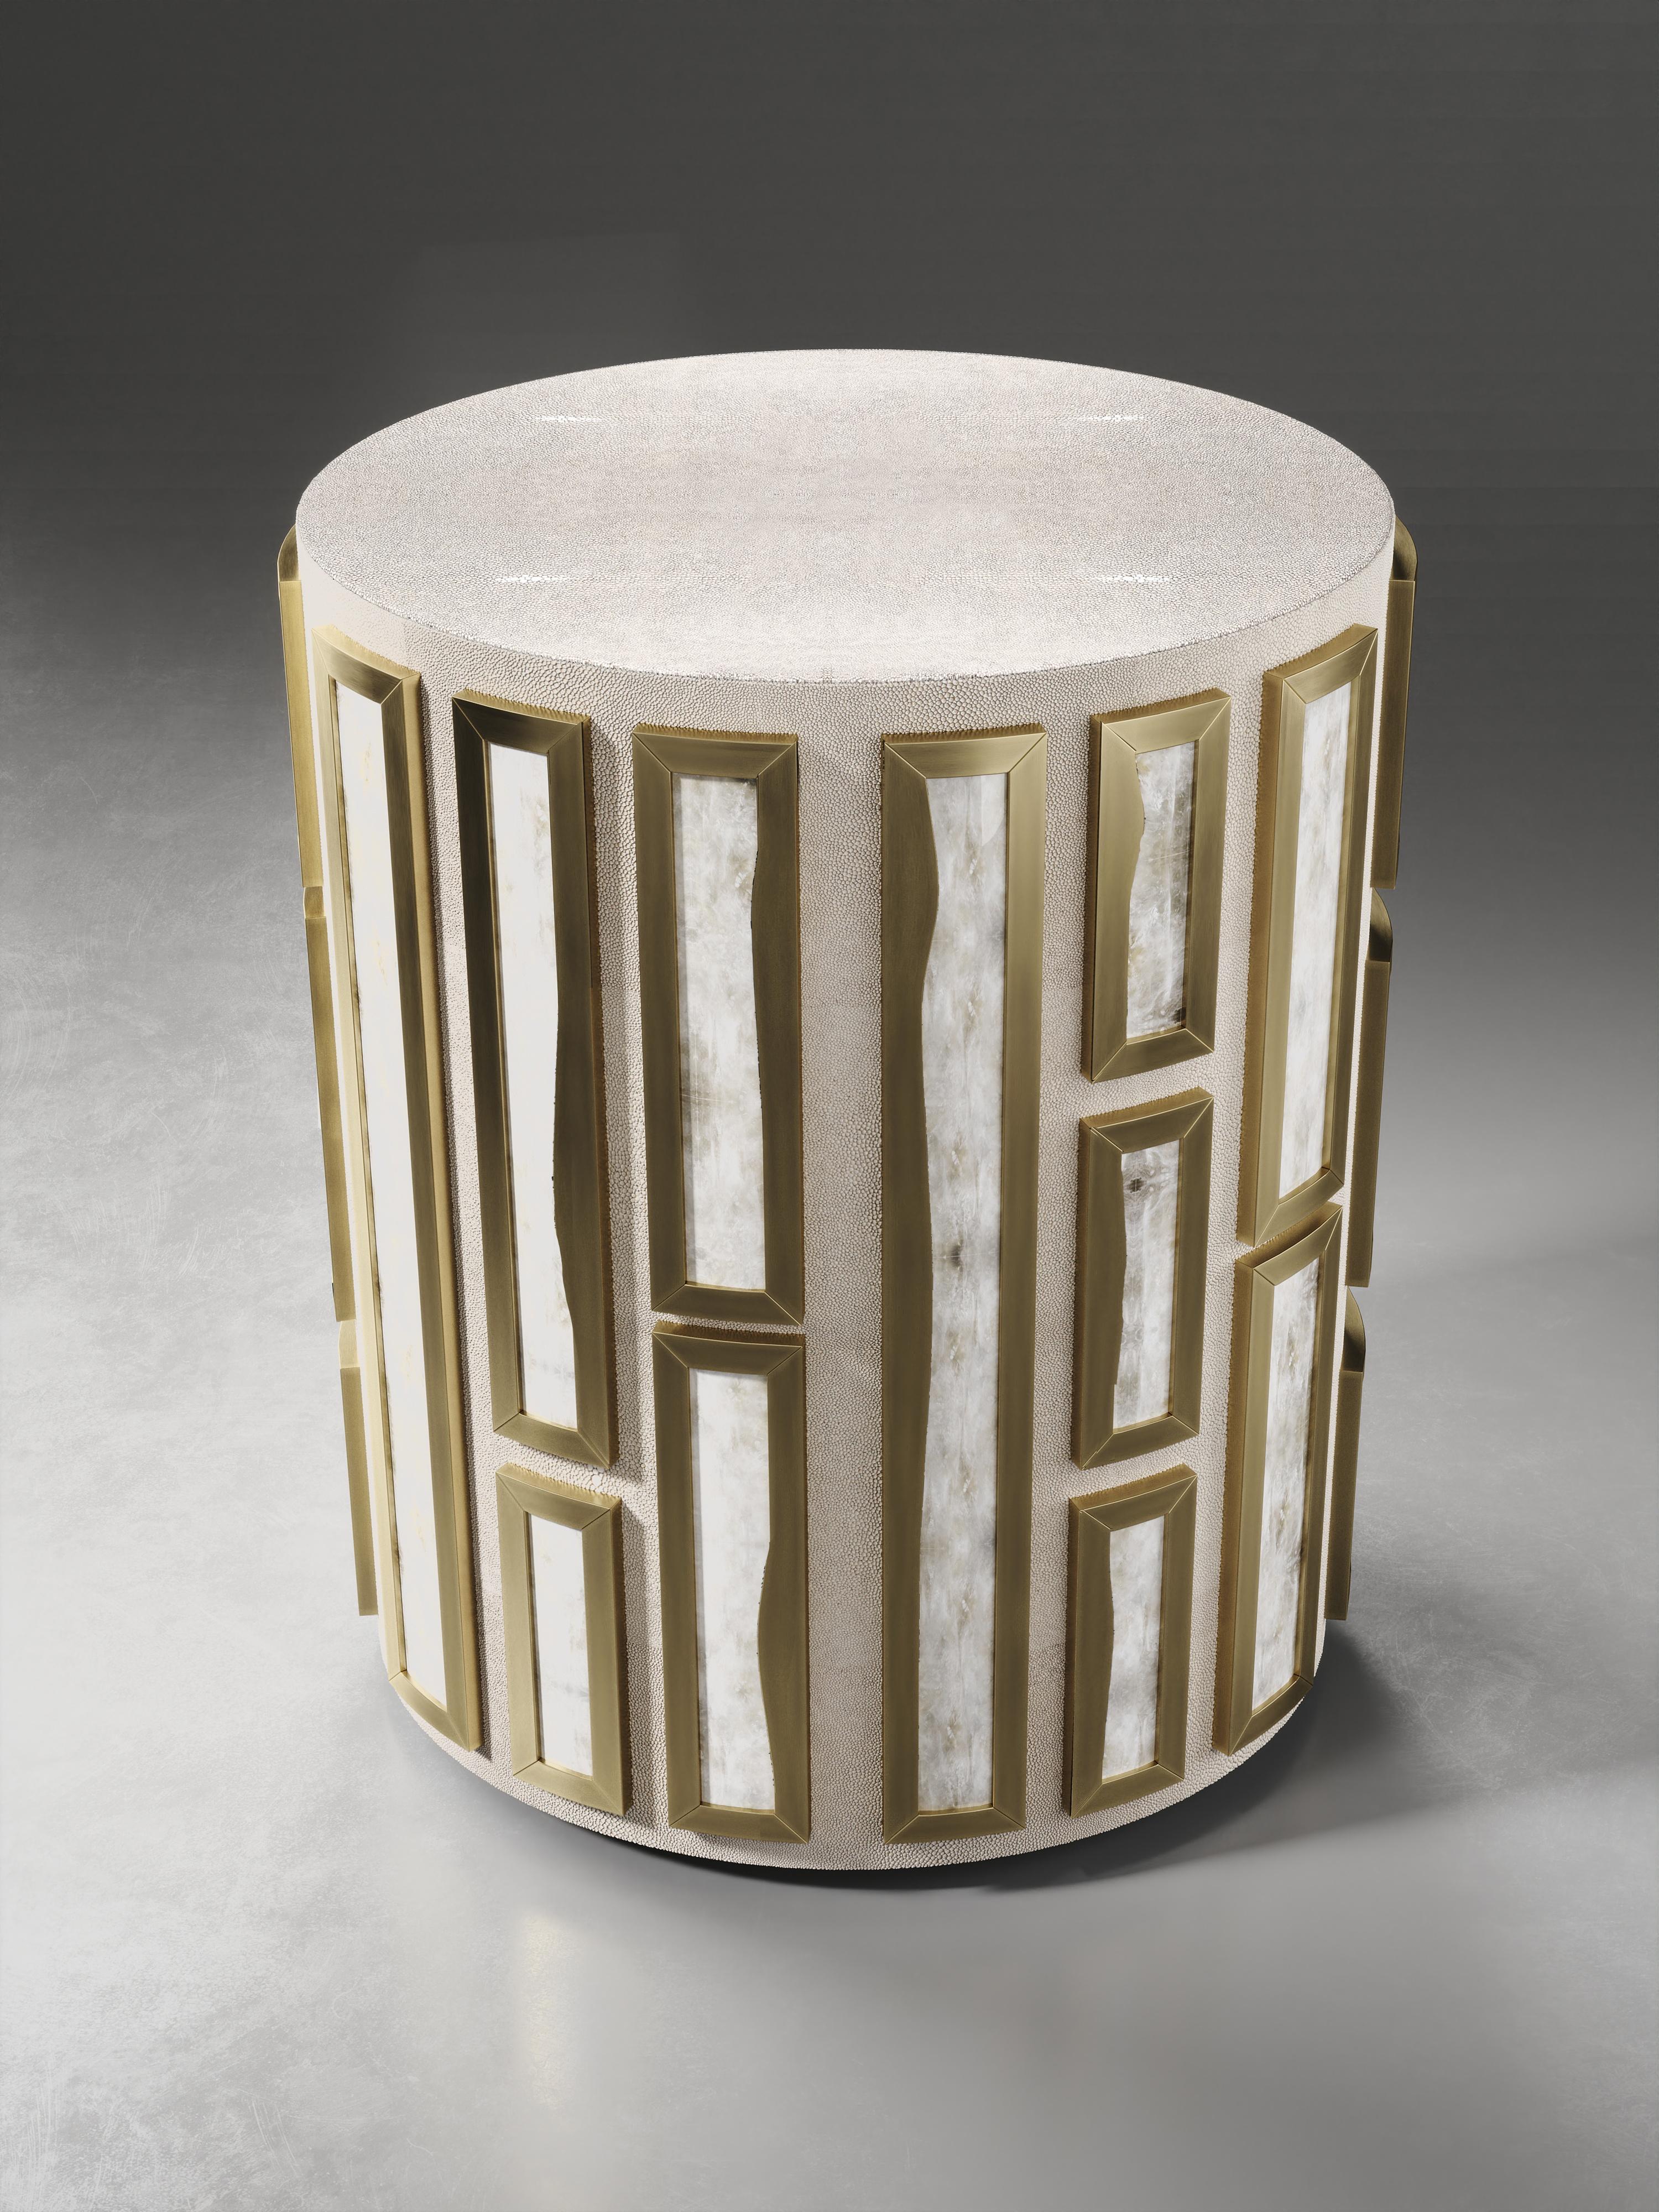 The Talisa side table by R&Y Augousti is originally inspired by the jewelry chest version of it (see images at end of slide). This circular piece is a solid structure inlaid in cream shagreen and bejeweled with raised intricate white quartz inserts